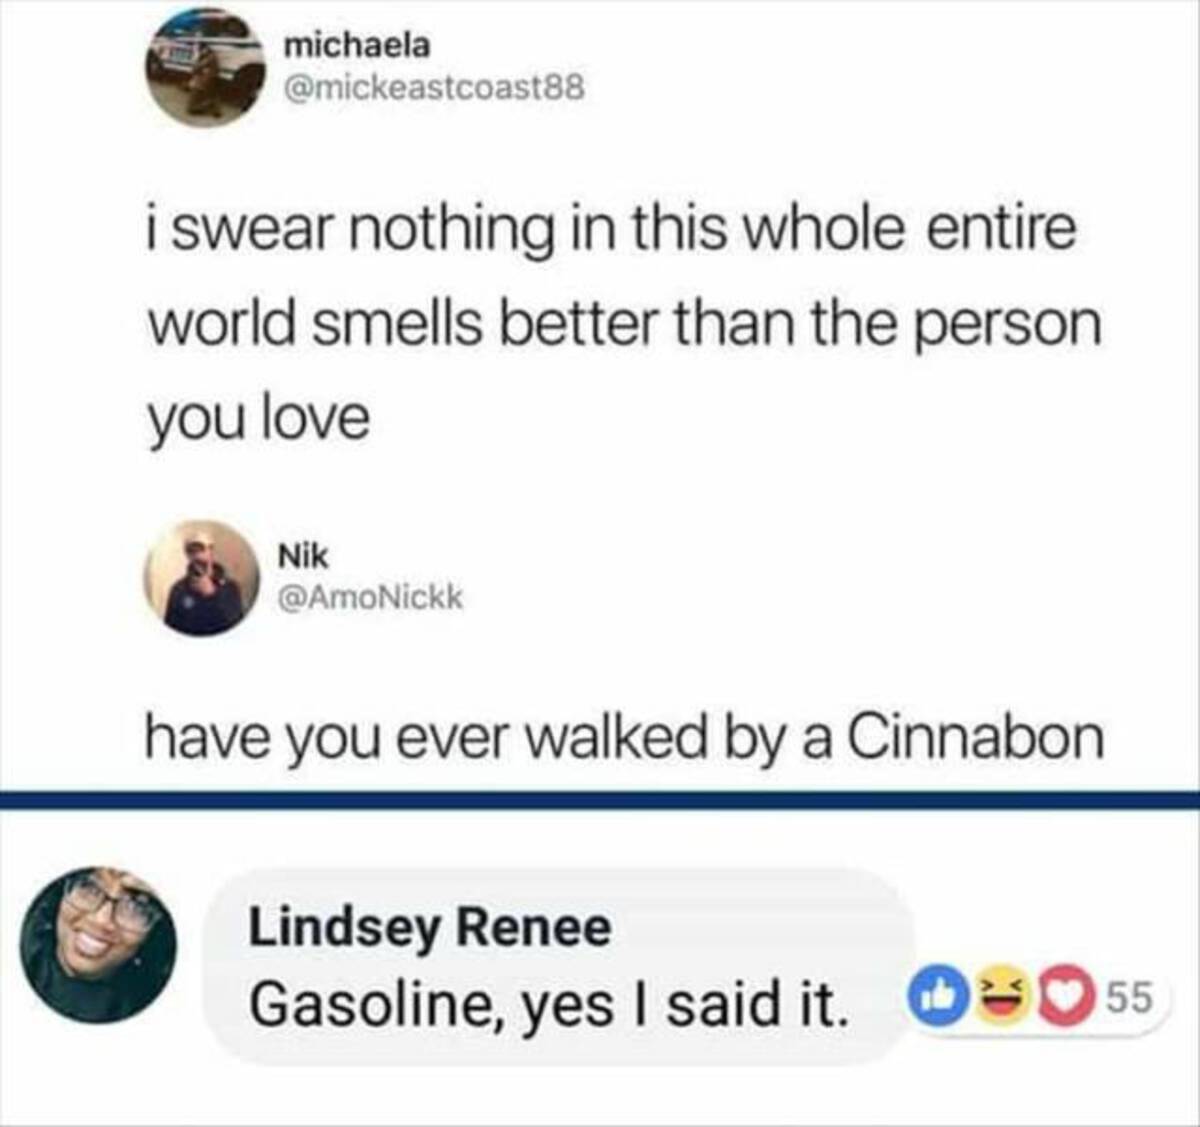 screenshot - michaela i swear nothing in this whole entire world smells better than the person you love Nik have you ever walked by a Cinnabon Lindsey Renee Gasoline, yes I said it. 55